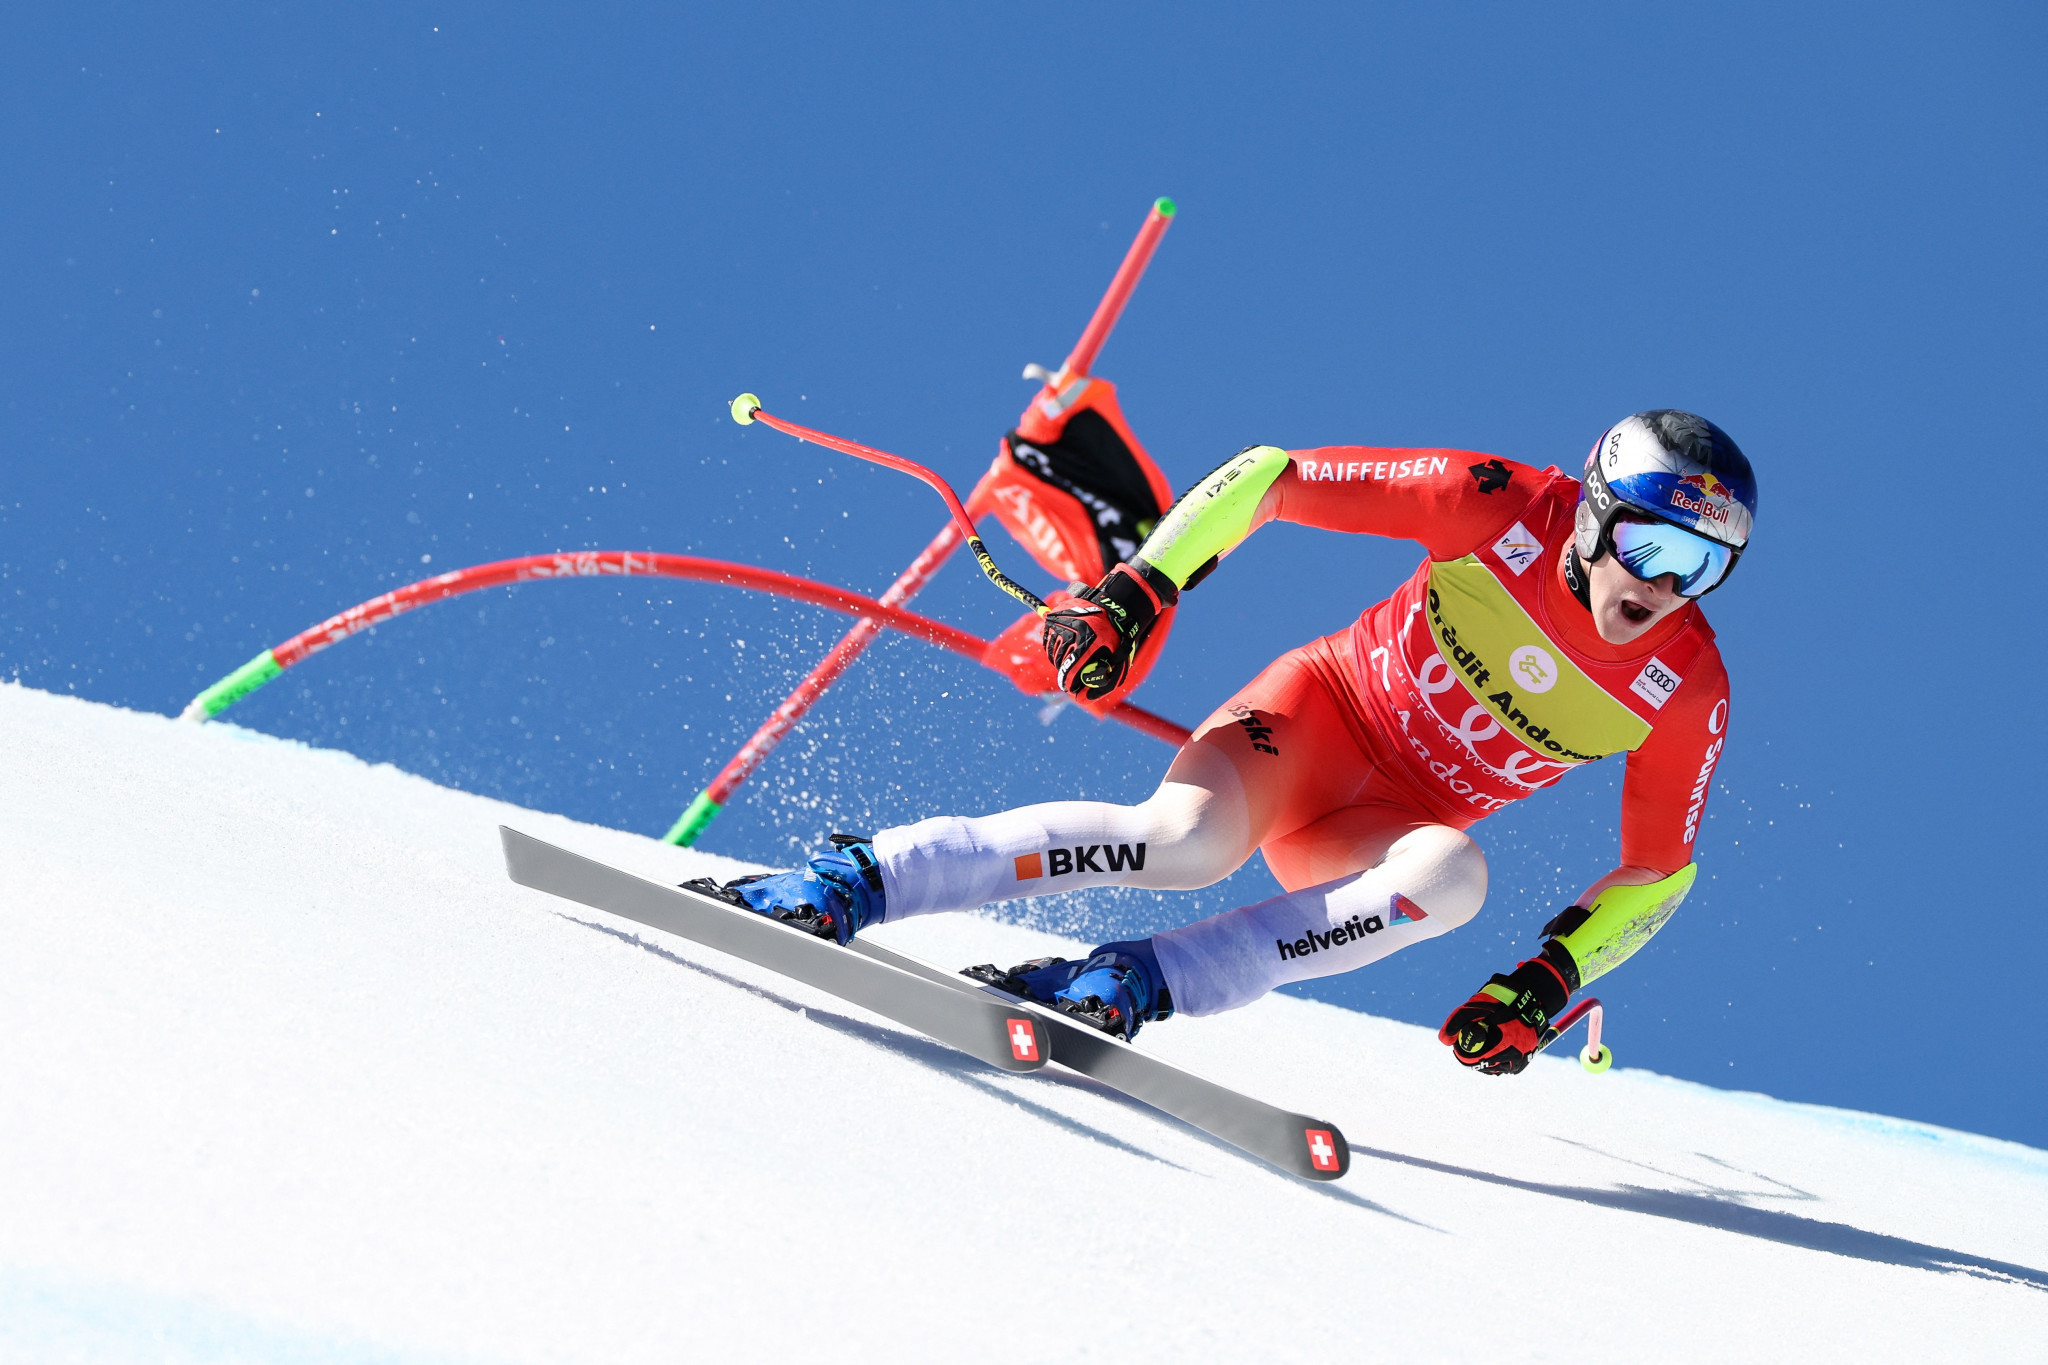 Marco Odermatt of Switzerland needs a top-three finish in his next race to break the record for most points in a men's Alpine Ski World Cup season ©Getty Images